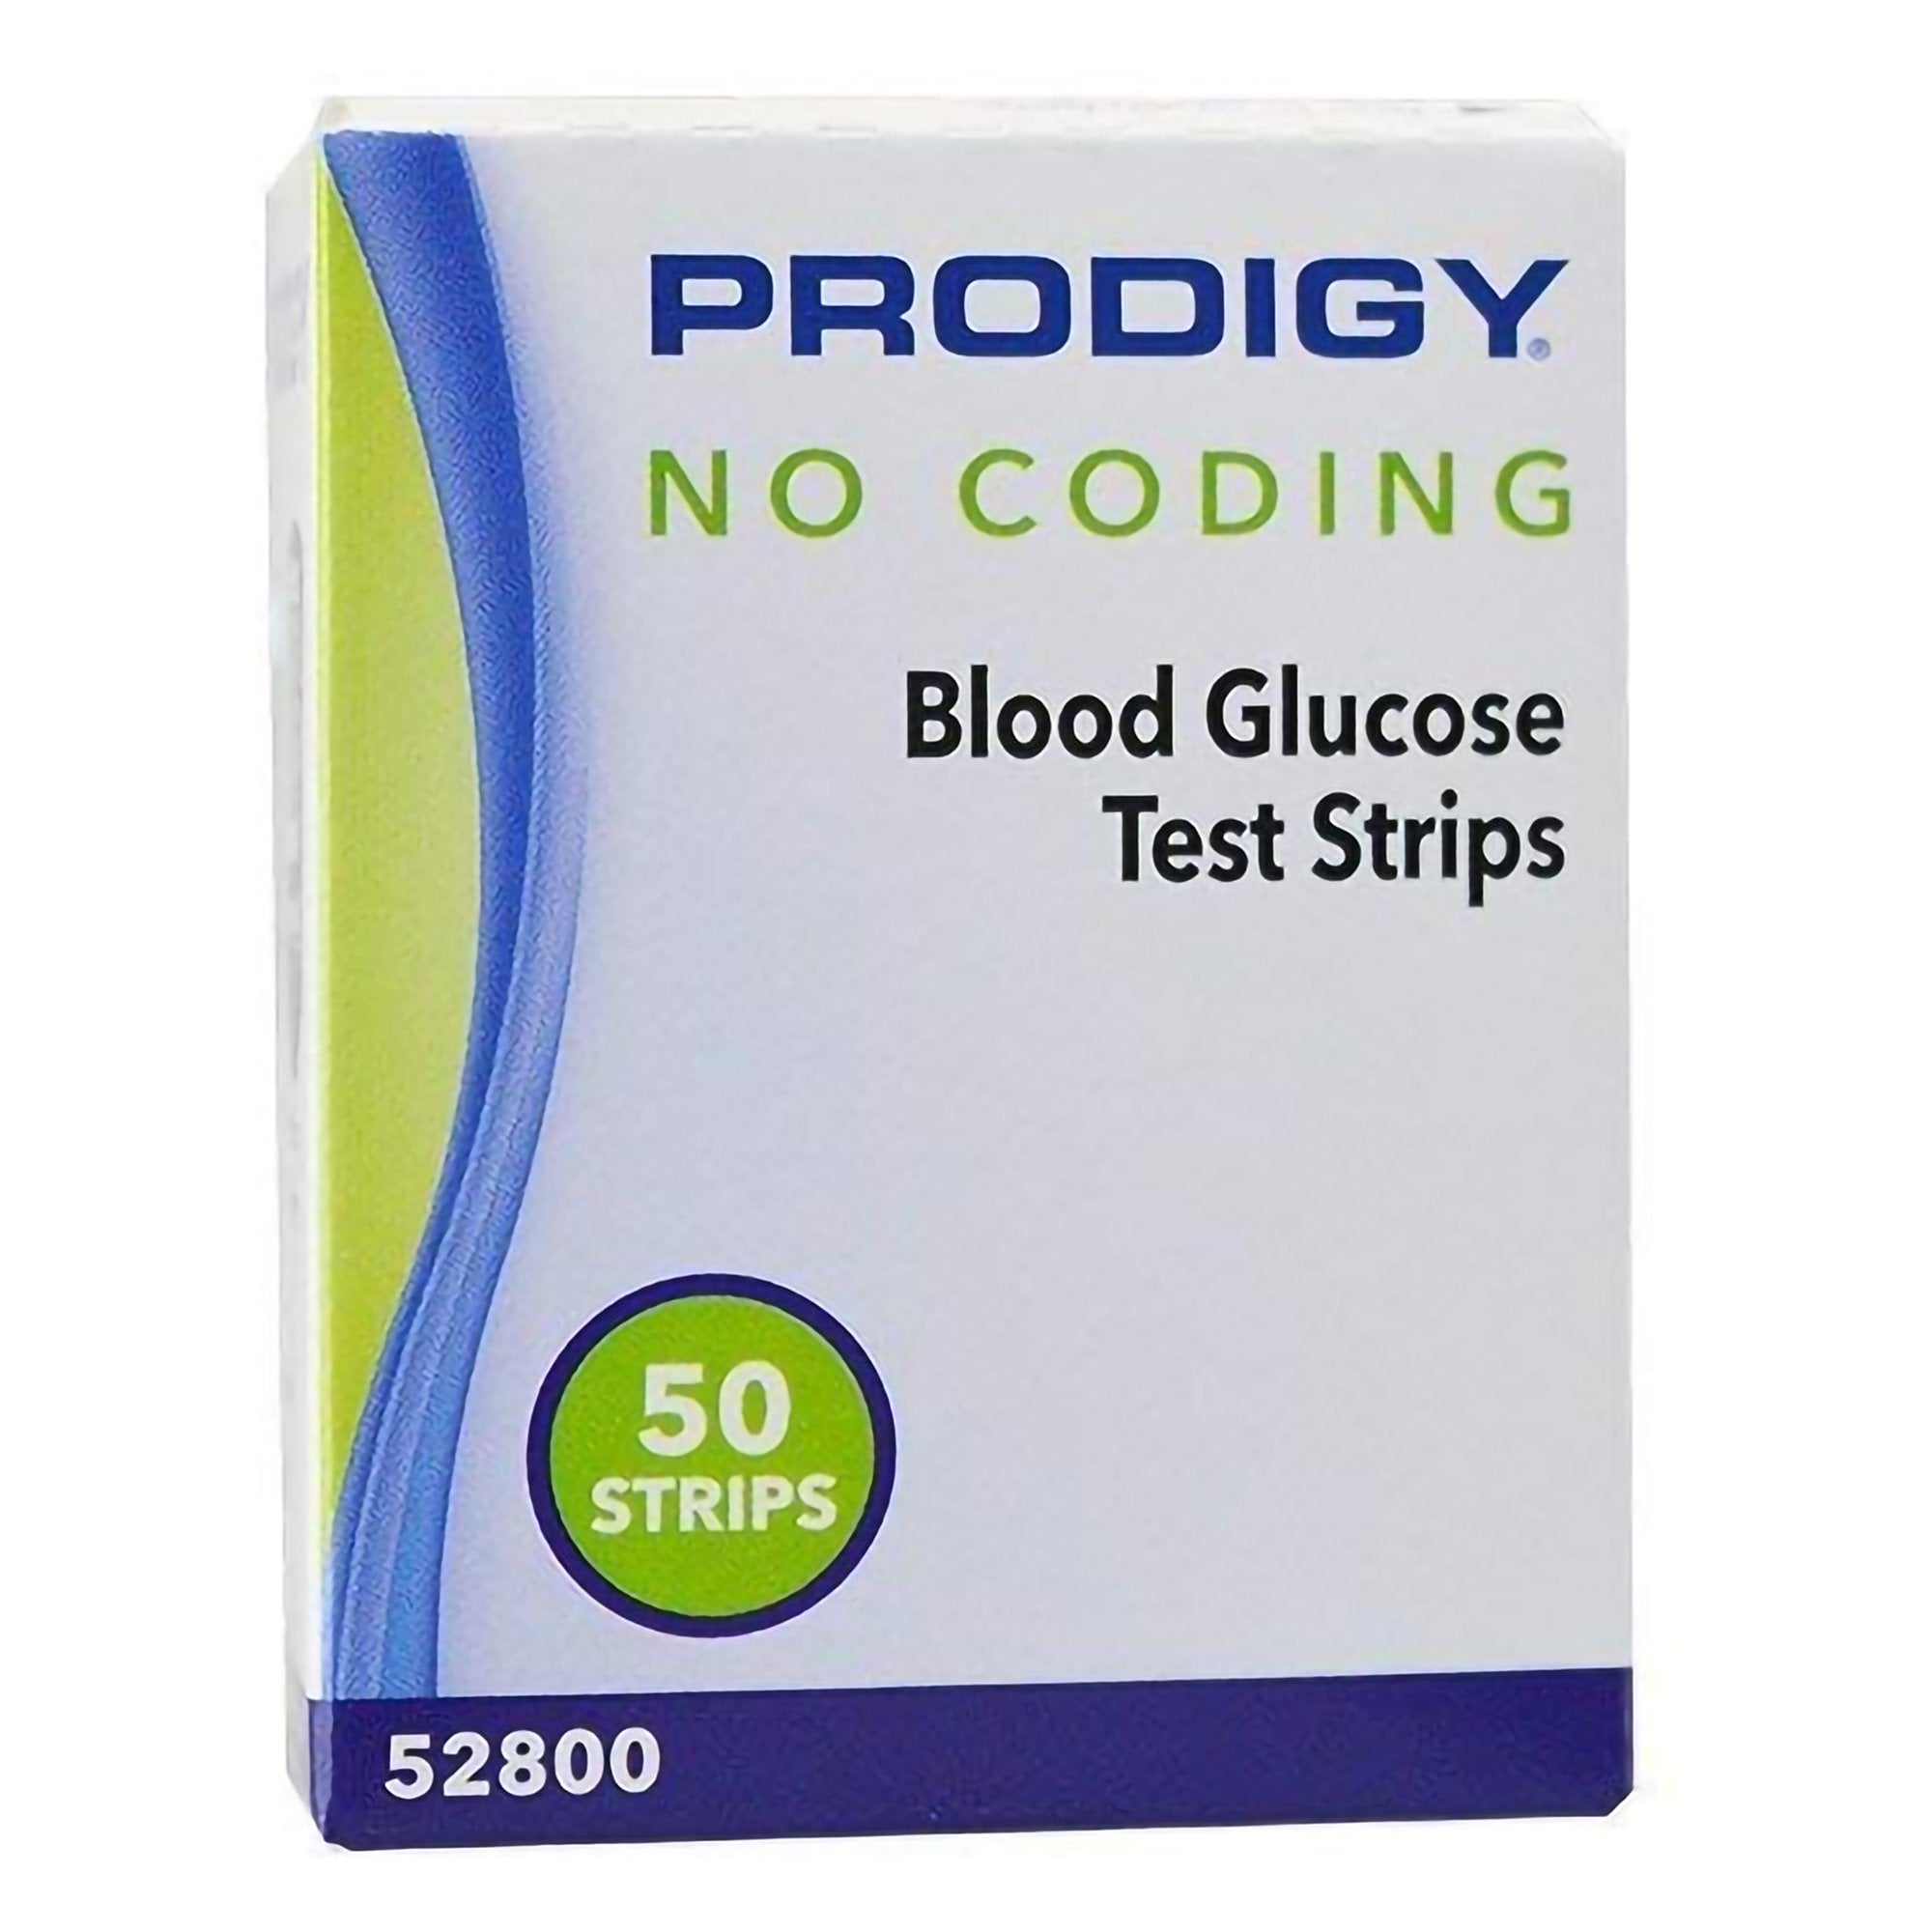 Blood Glucose Test Strips Prodigy 50 Strips per Pack